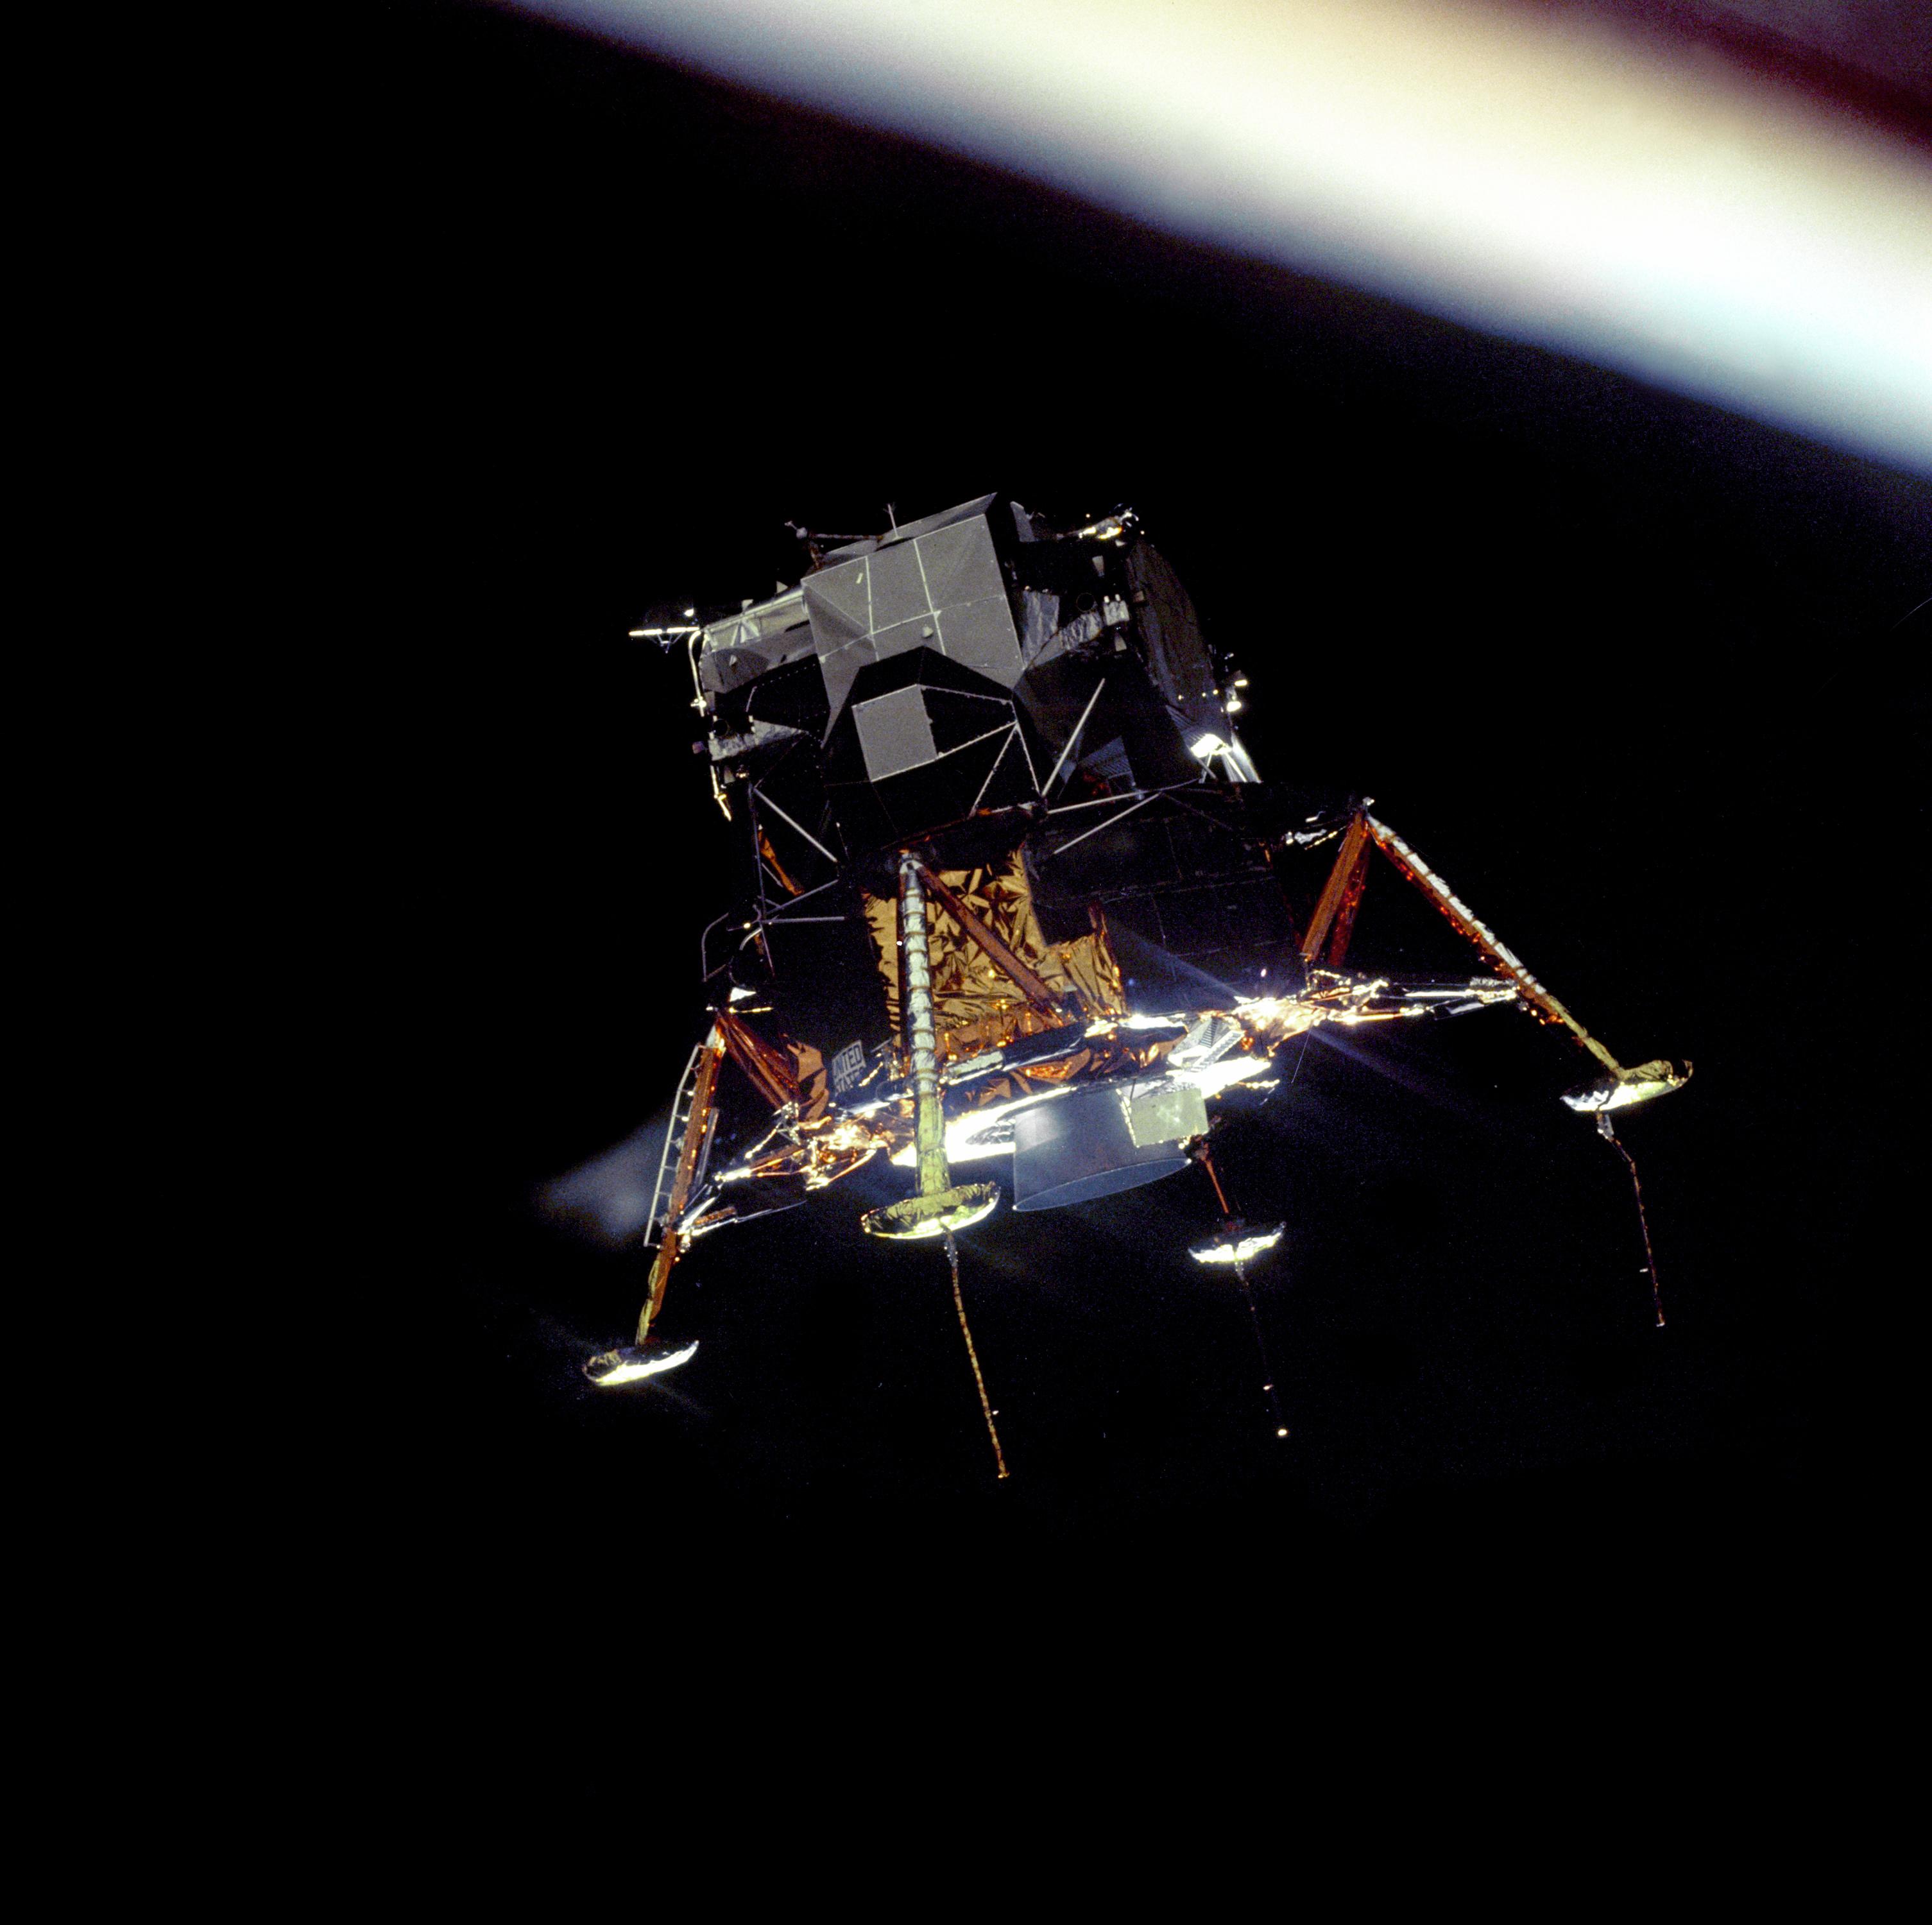 The Eagle lunar module heads out to the Moon surface shortly after being jettisoned from the Apollo 11 command and service module on July 20, 1969.